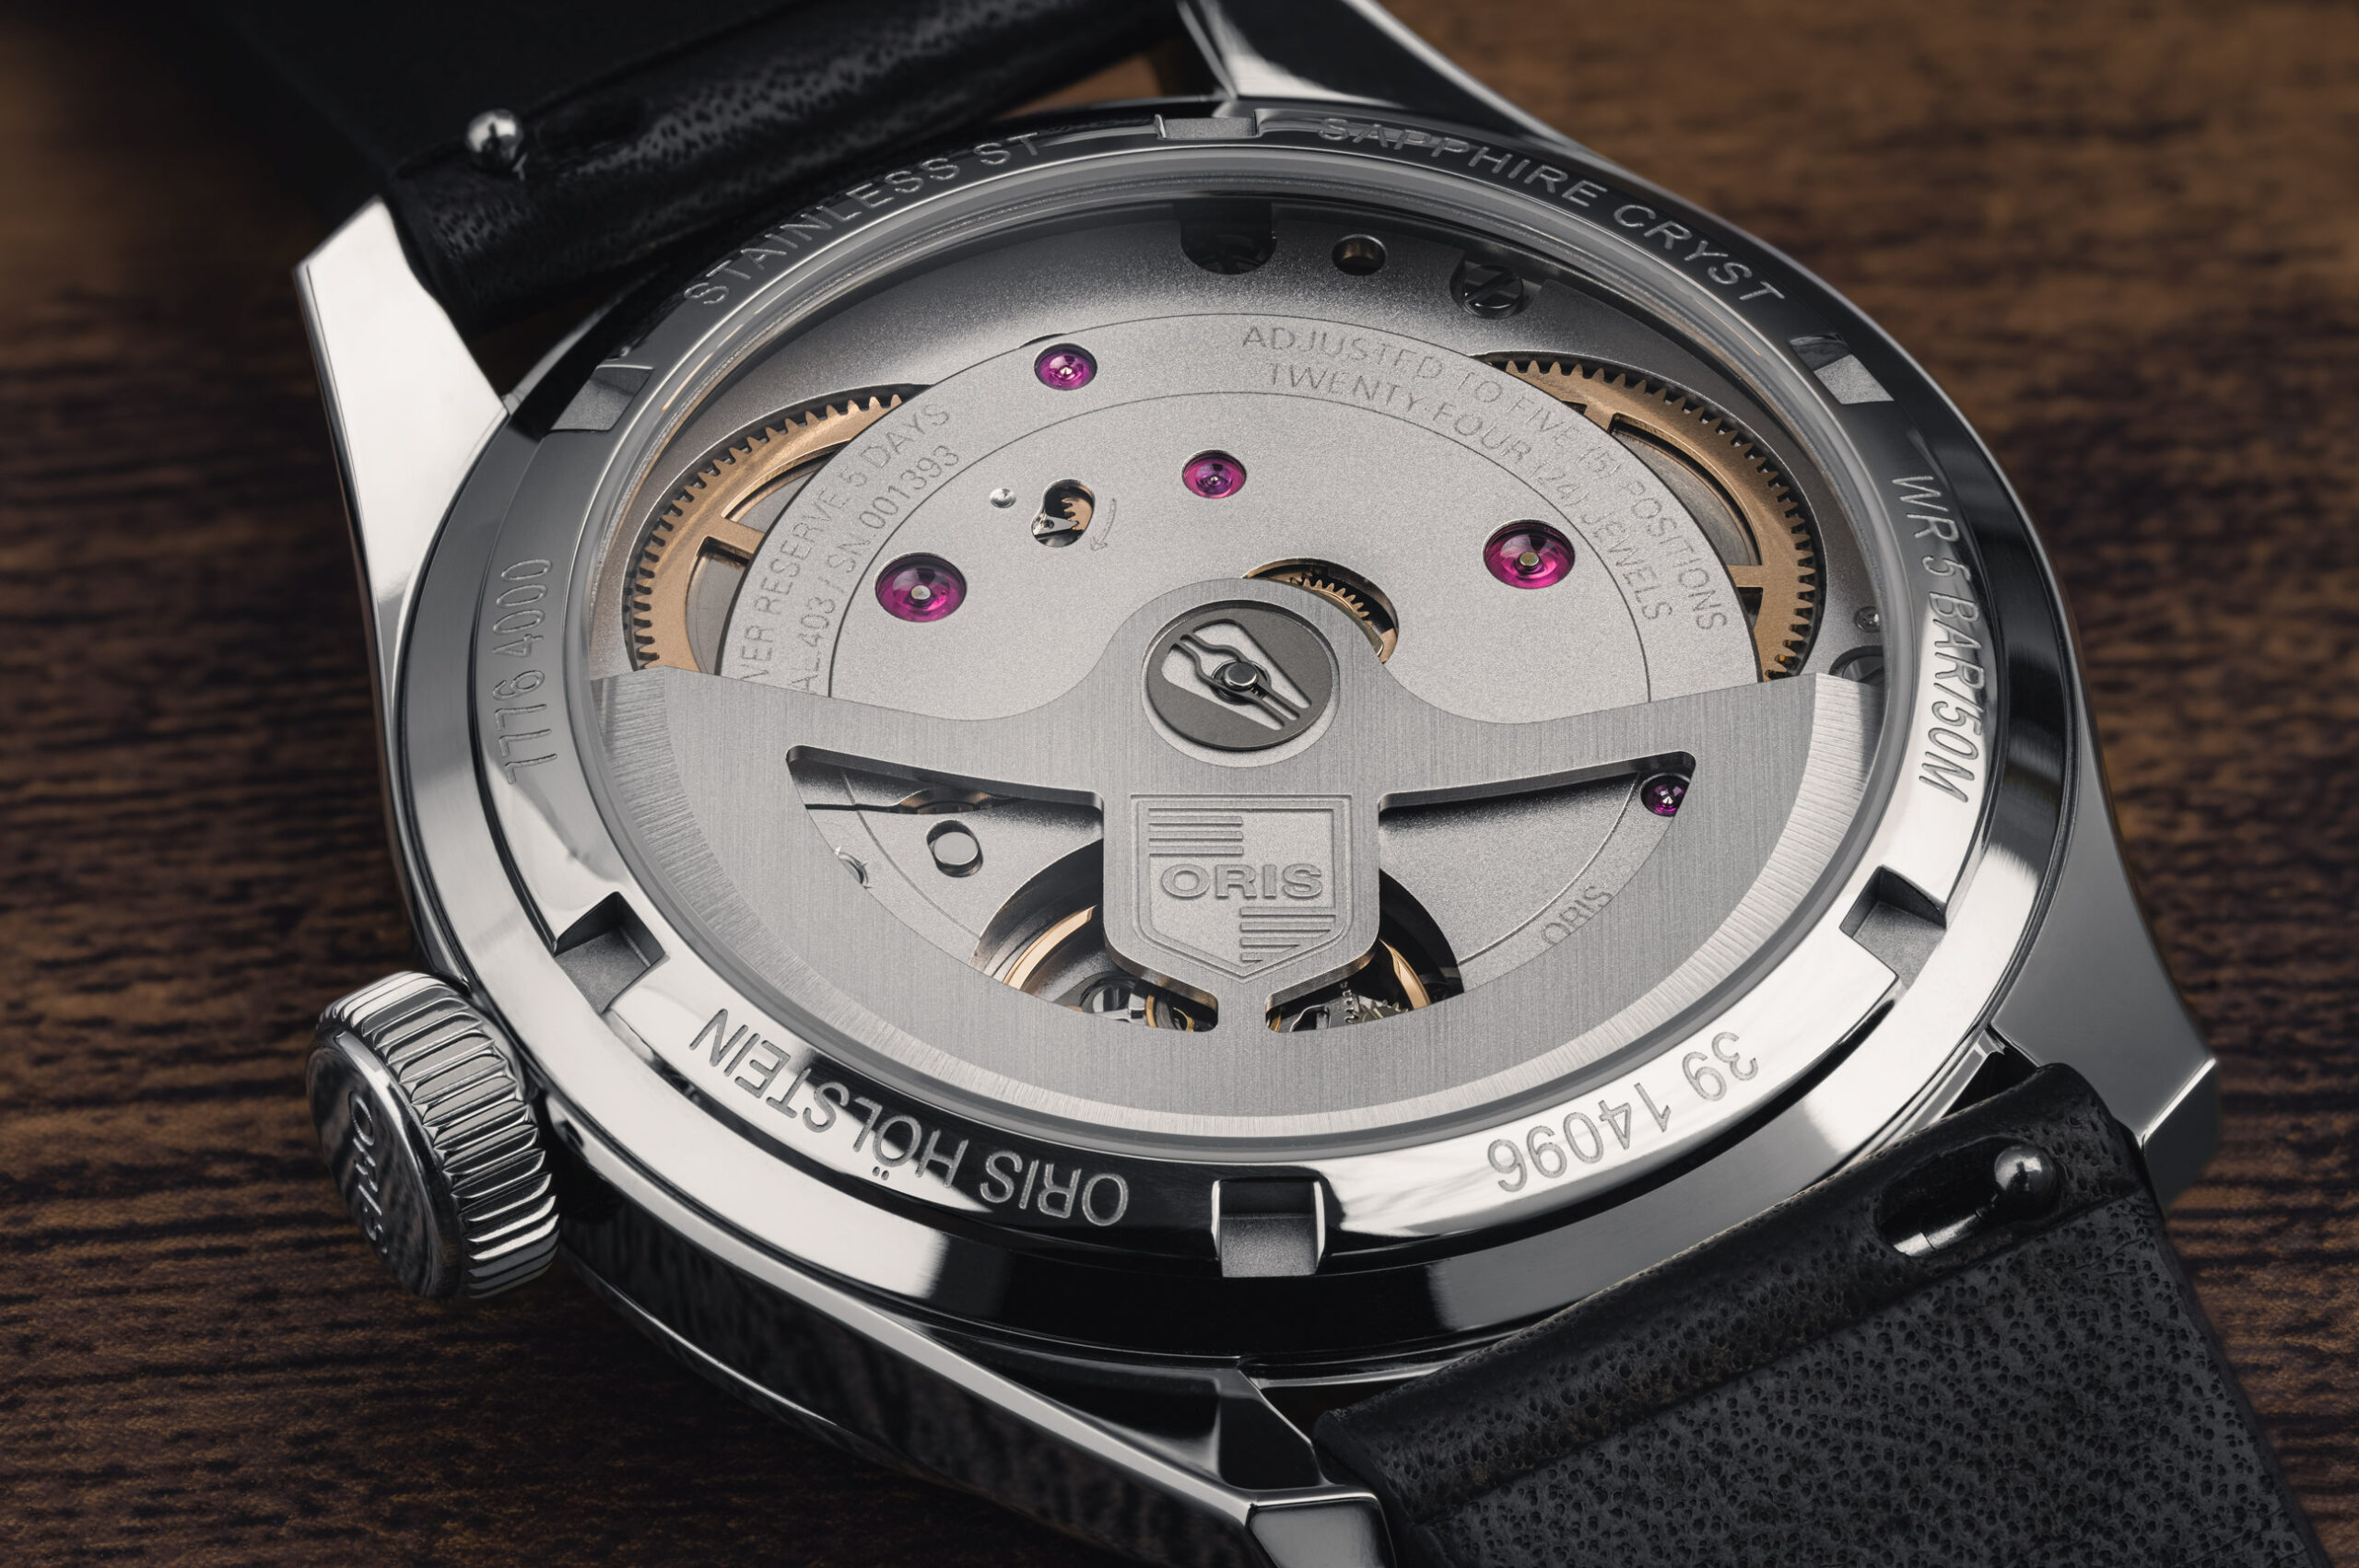 The Oris Calibre 403 found inside the Big Crown Pointer Date 403